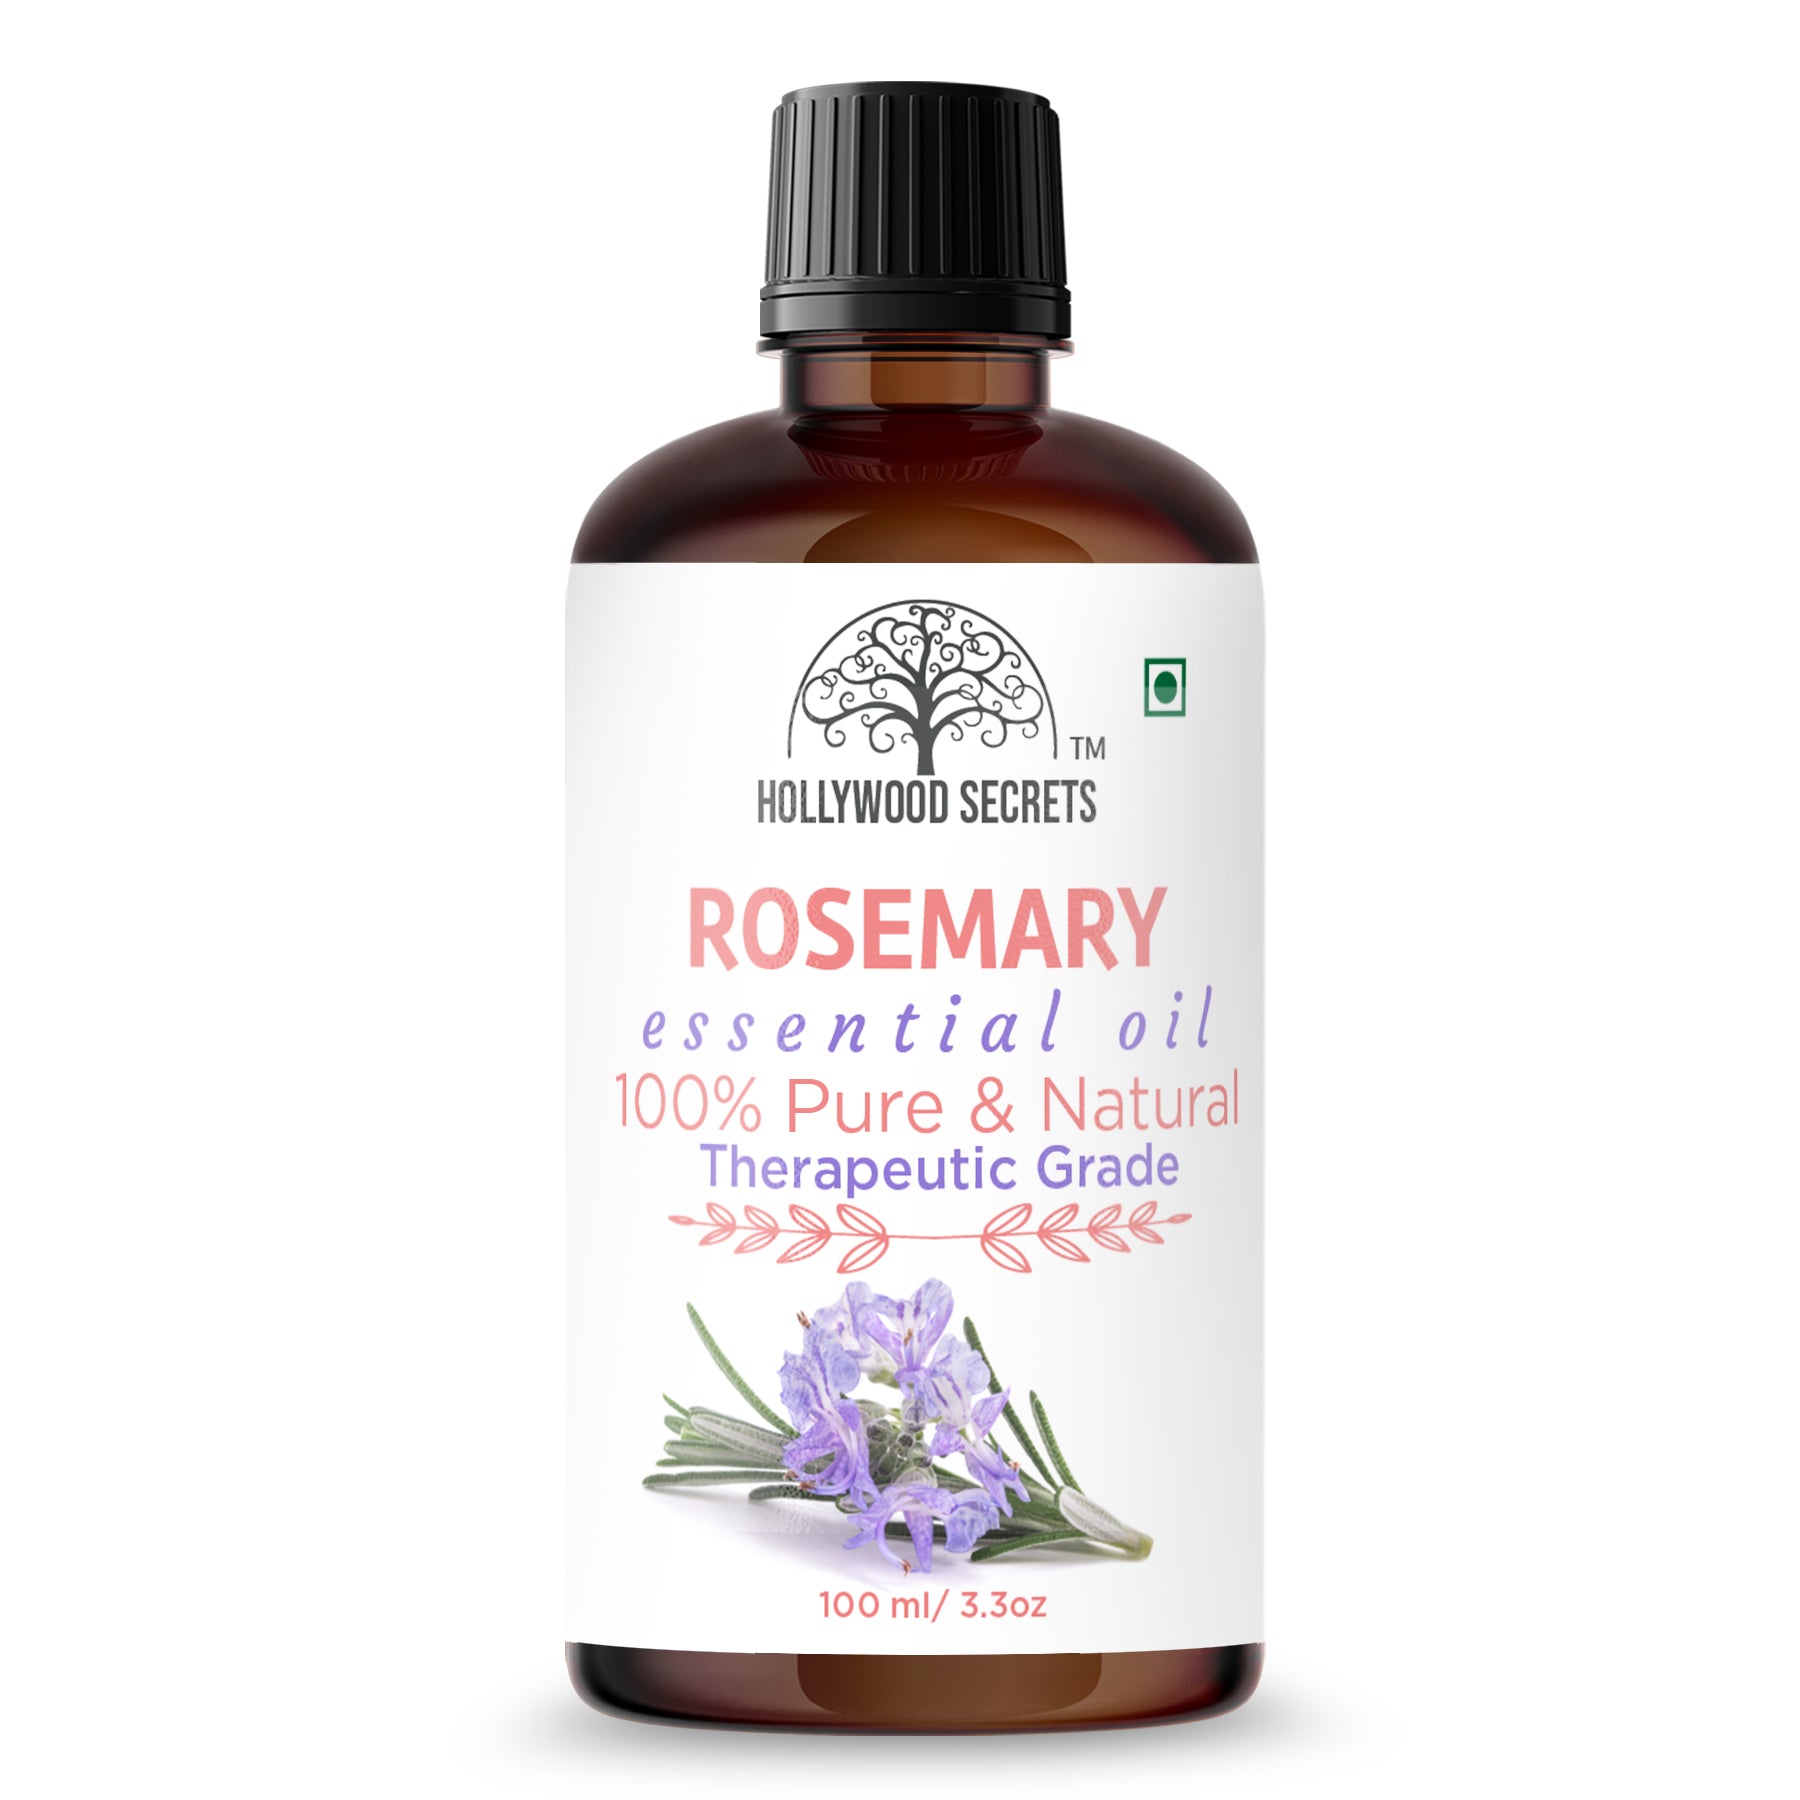 Rosemary Essential Oil Pure Therapeutic Buy Shop Online India Best Price –  Hollywood Secrets